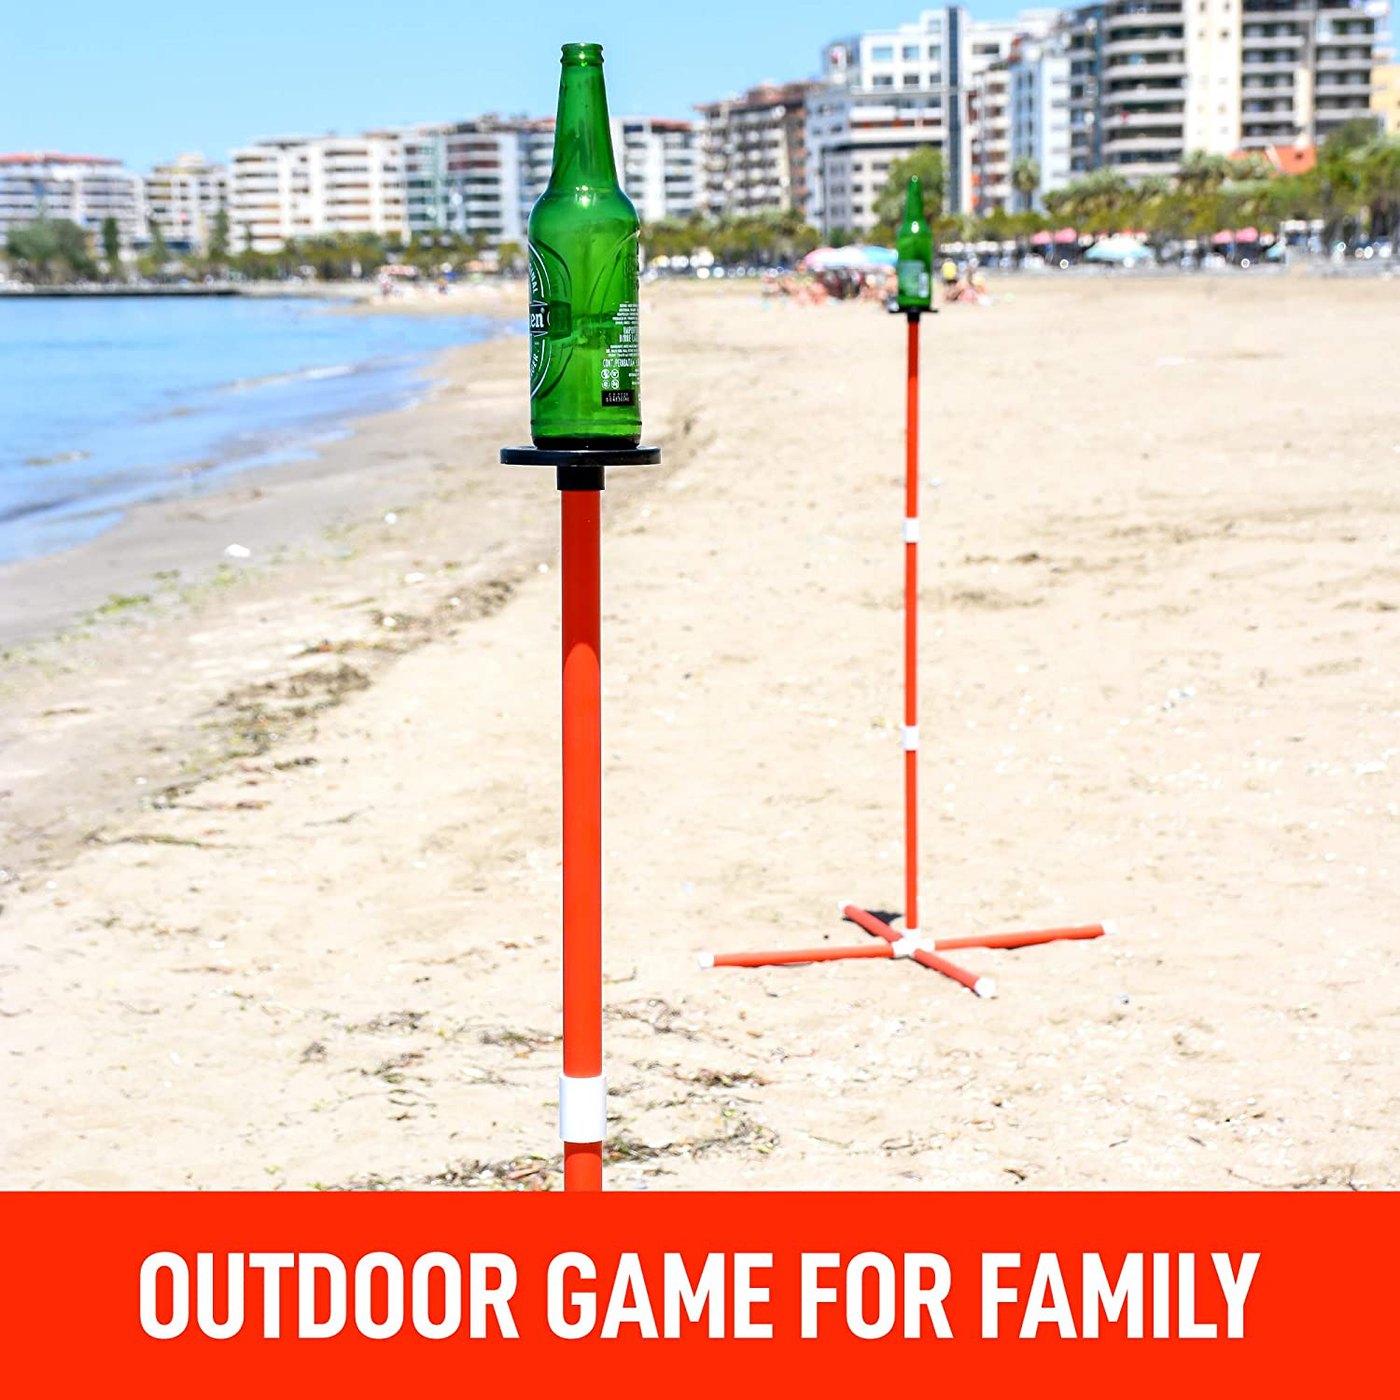 Frisbee Bottle Game - Back Yard Game for Family - Frisbee Beach Game for Kids and Adults - Ring Toss Outdoor Game with Adjustable Poles - Flying Disk Throwing Game - Easy Set Up Adult Lawn Game